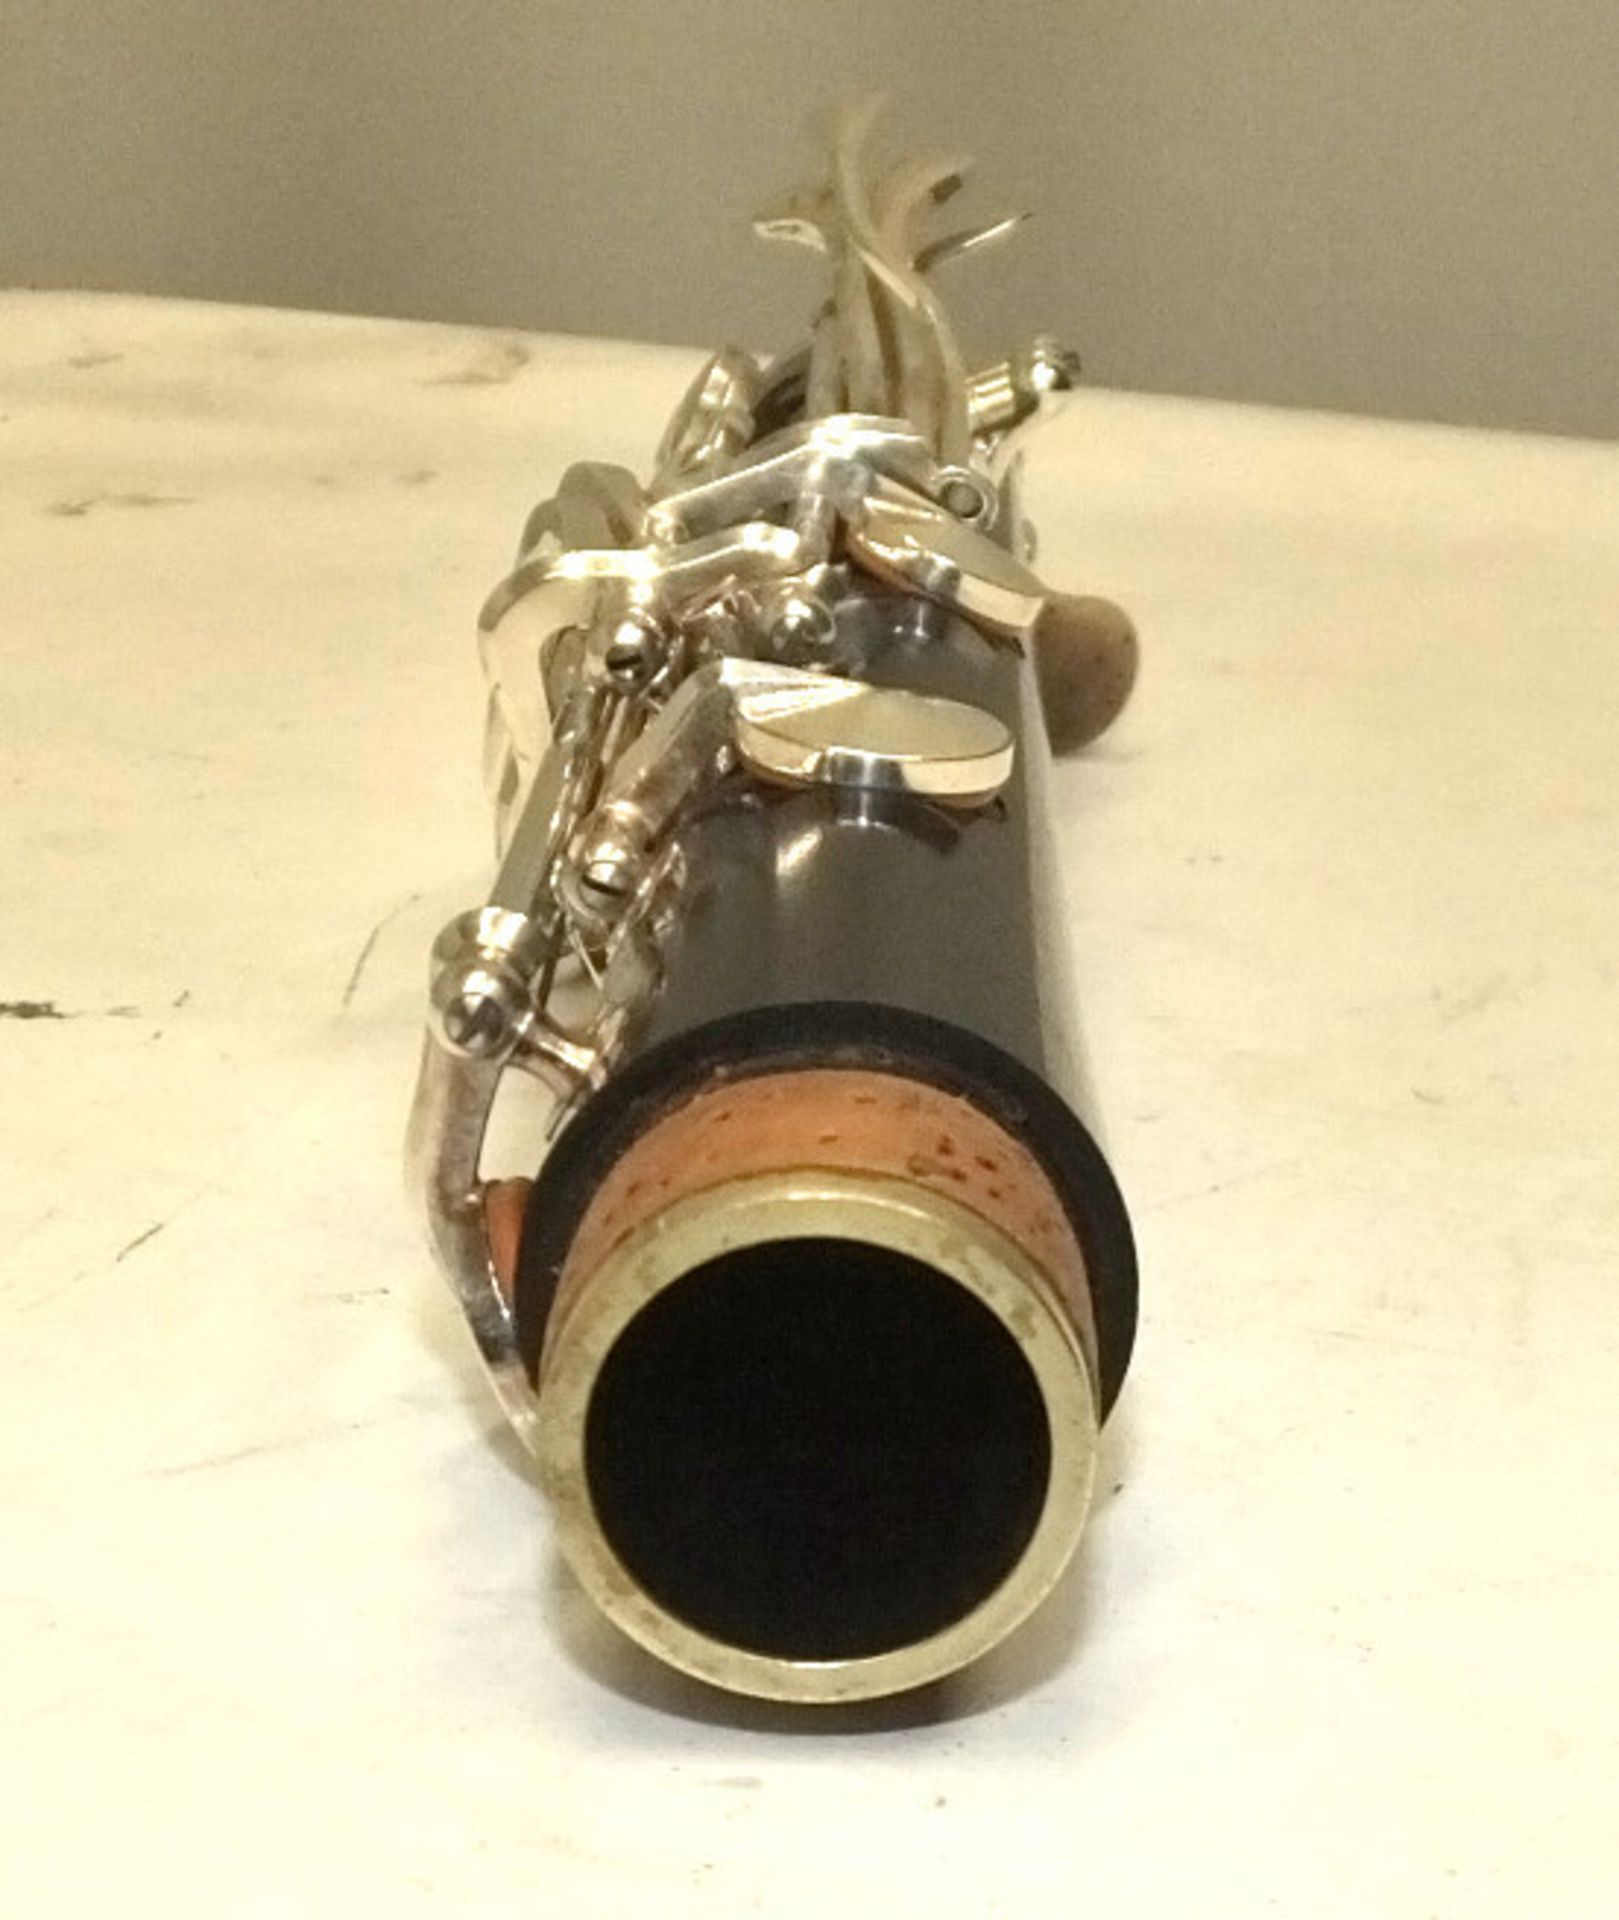 Howarth S2 Clarinet in case - Serial Number - 2228. - Image 5 of 17